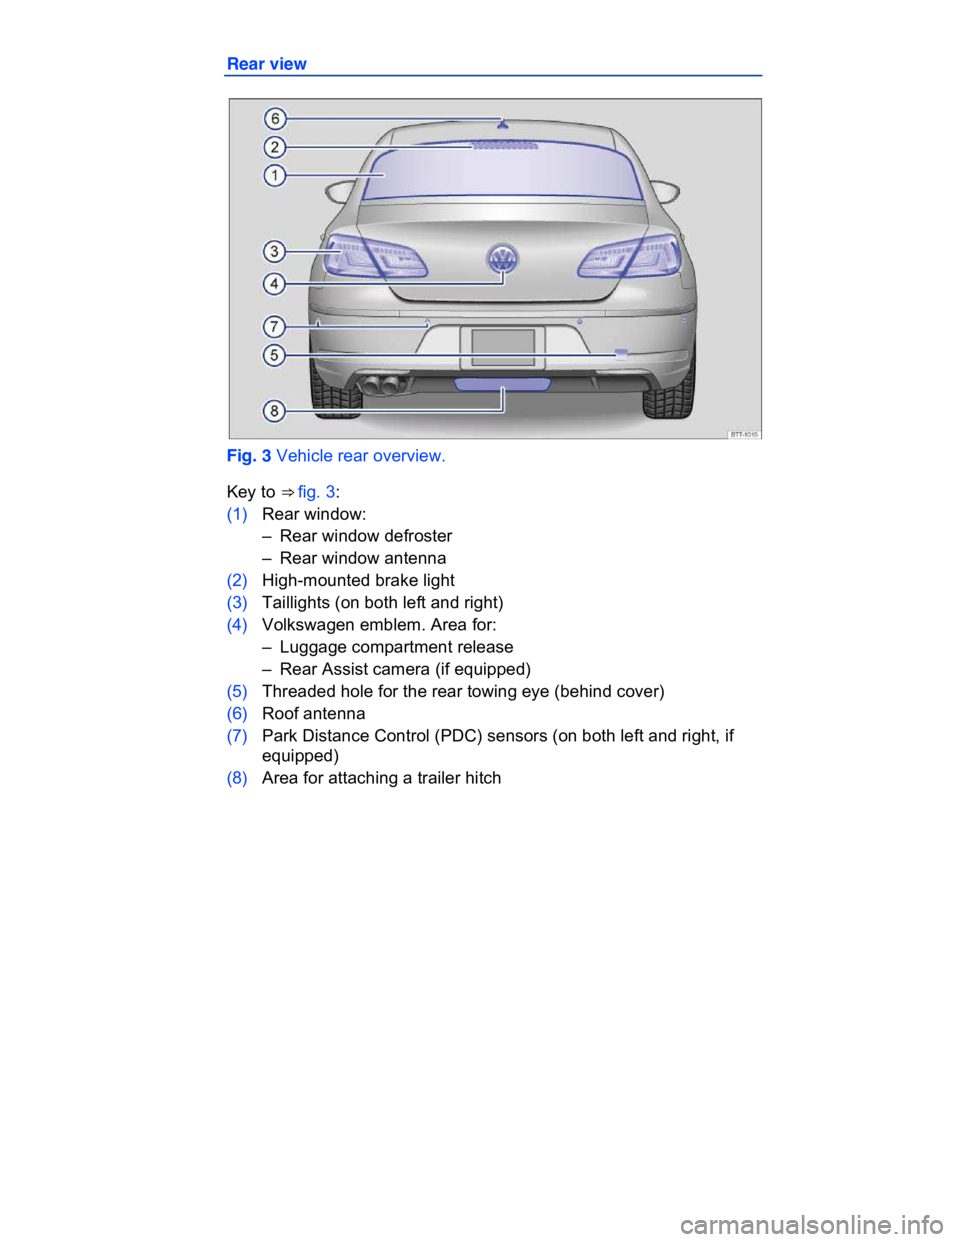 VOLKSWAGEN CC 2013  Owners Manual  
Rear view 
 
Fig. 3 Vehicle rear overview. 
Key to ⇒ fig. 3: 
(1) Rear window: 
–  Rear window defroster  
–  Rear window antenna  
(2) High-mounted brake light 
(3) Taillights (on both left